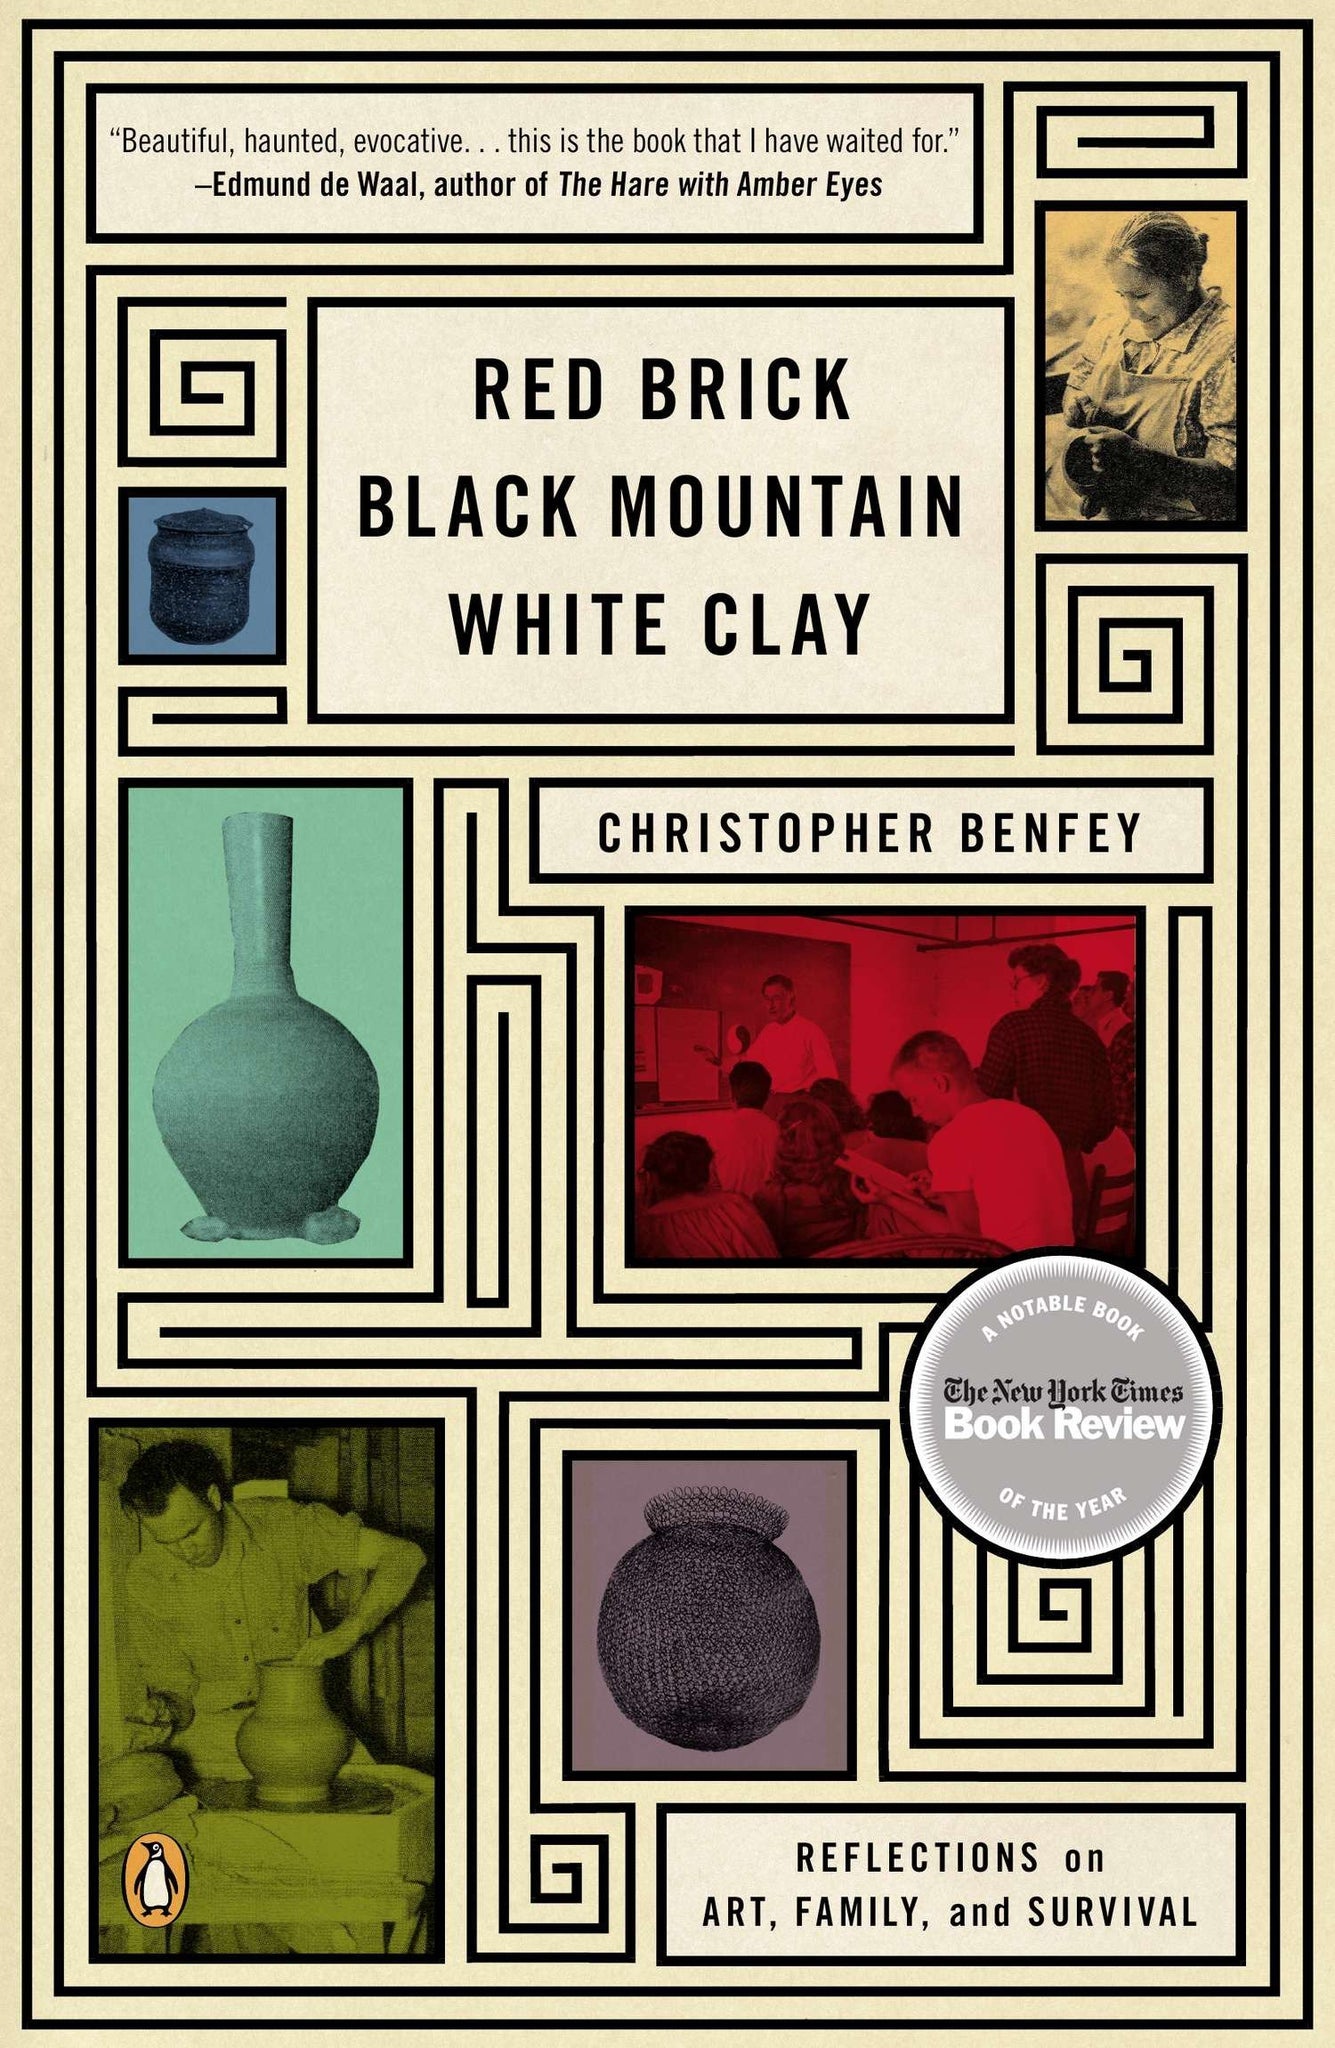 Red Brick, Black Mountain, White Clay: Reflections on Art, Family, and Survival by Christopher Benfey - Book at Kavi Gupta Editions